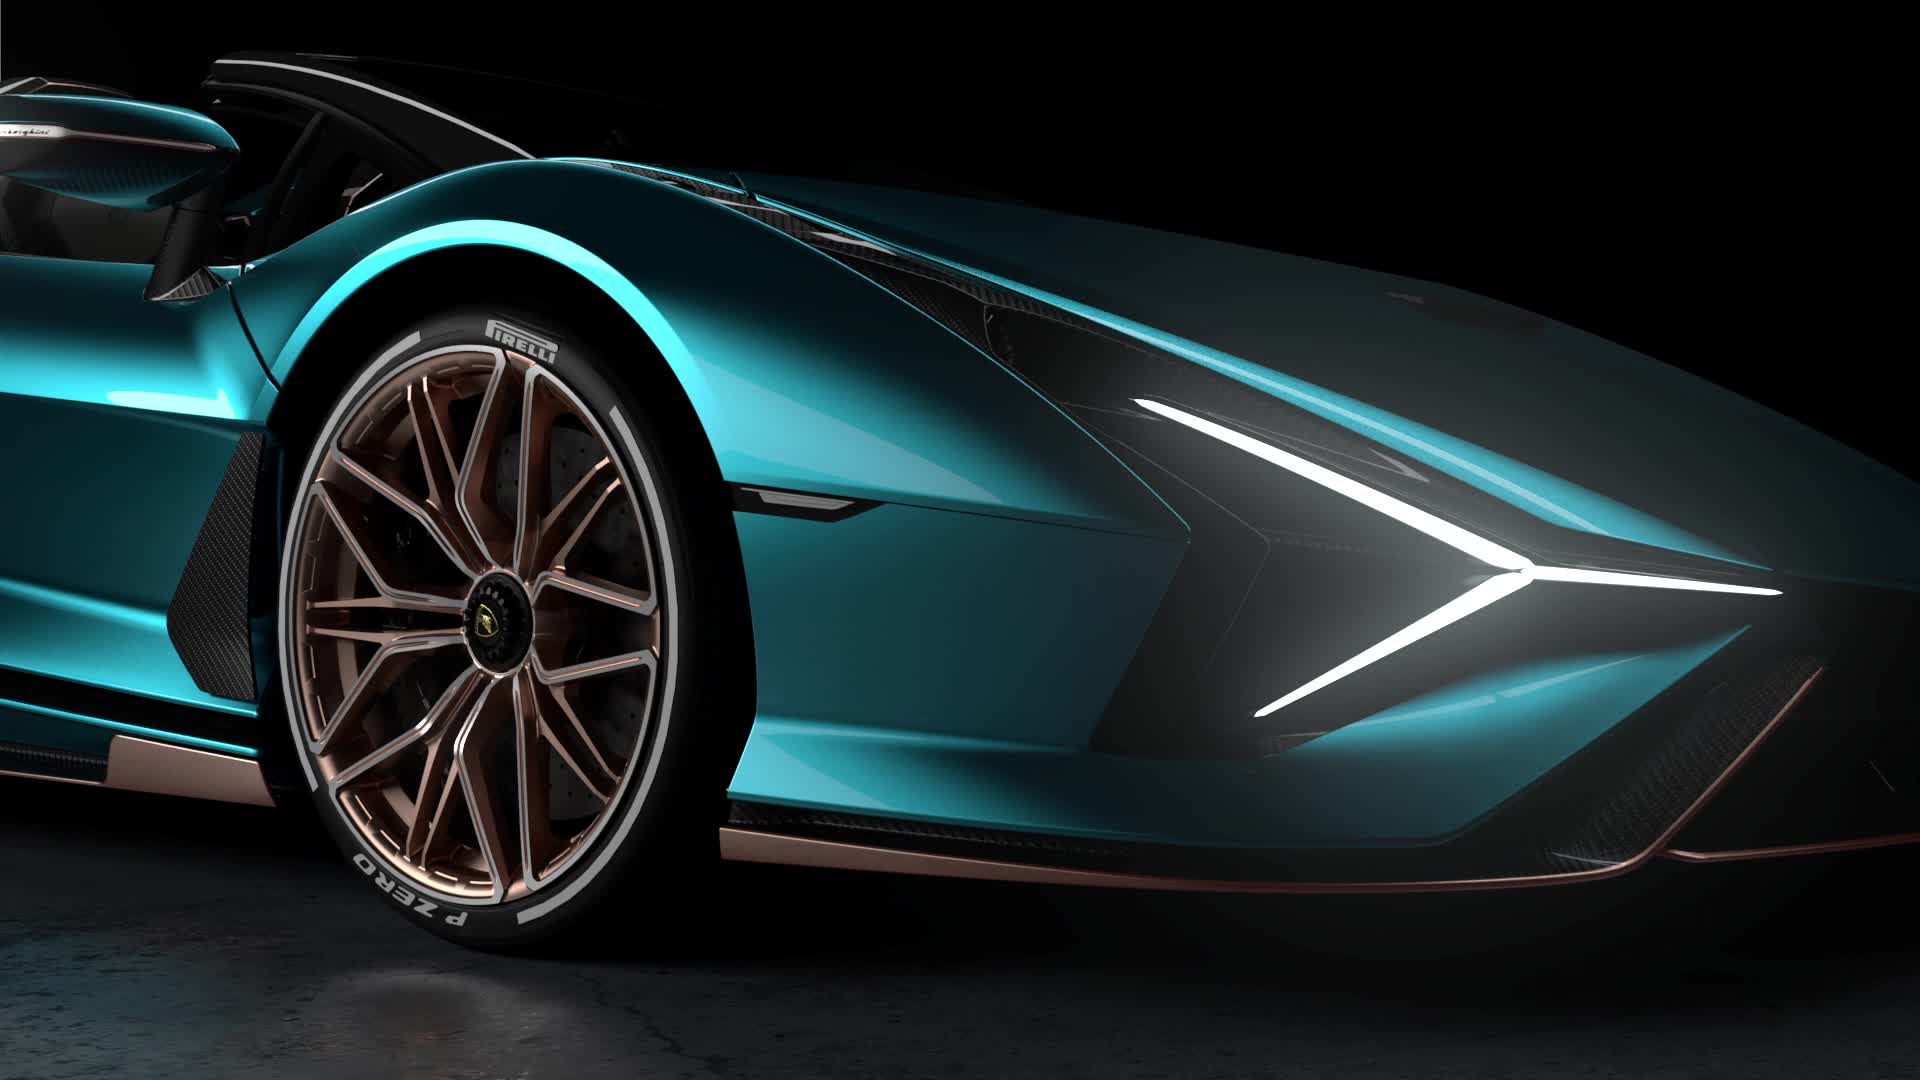 Lamborghini Sián Roadster - Technical Specifications, Pictures, Videos